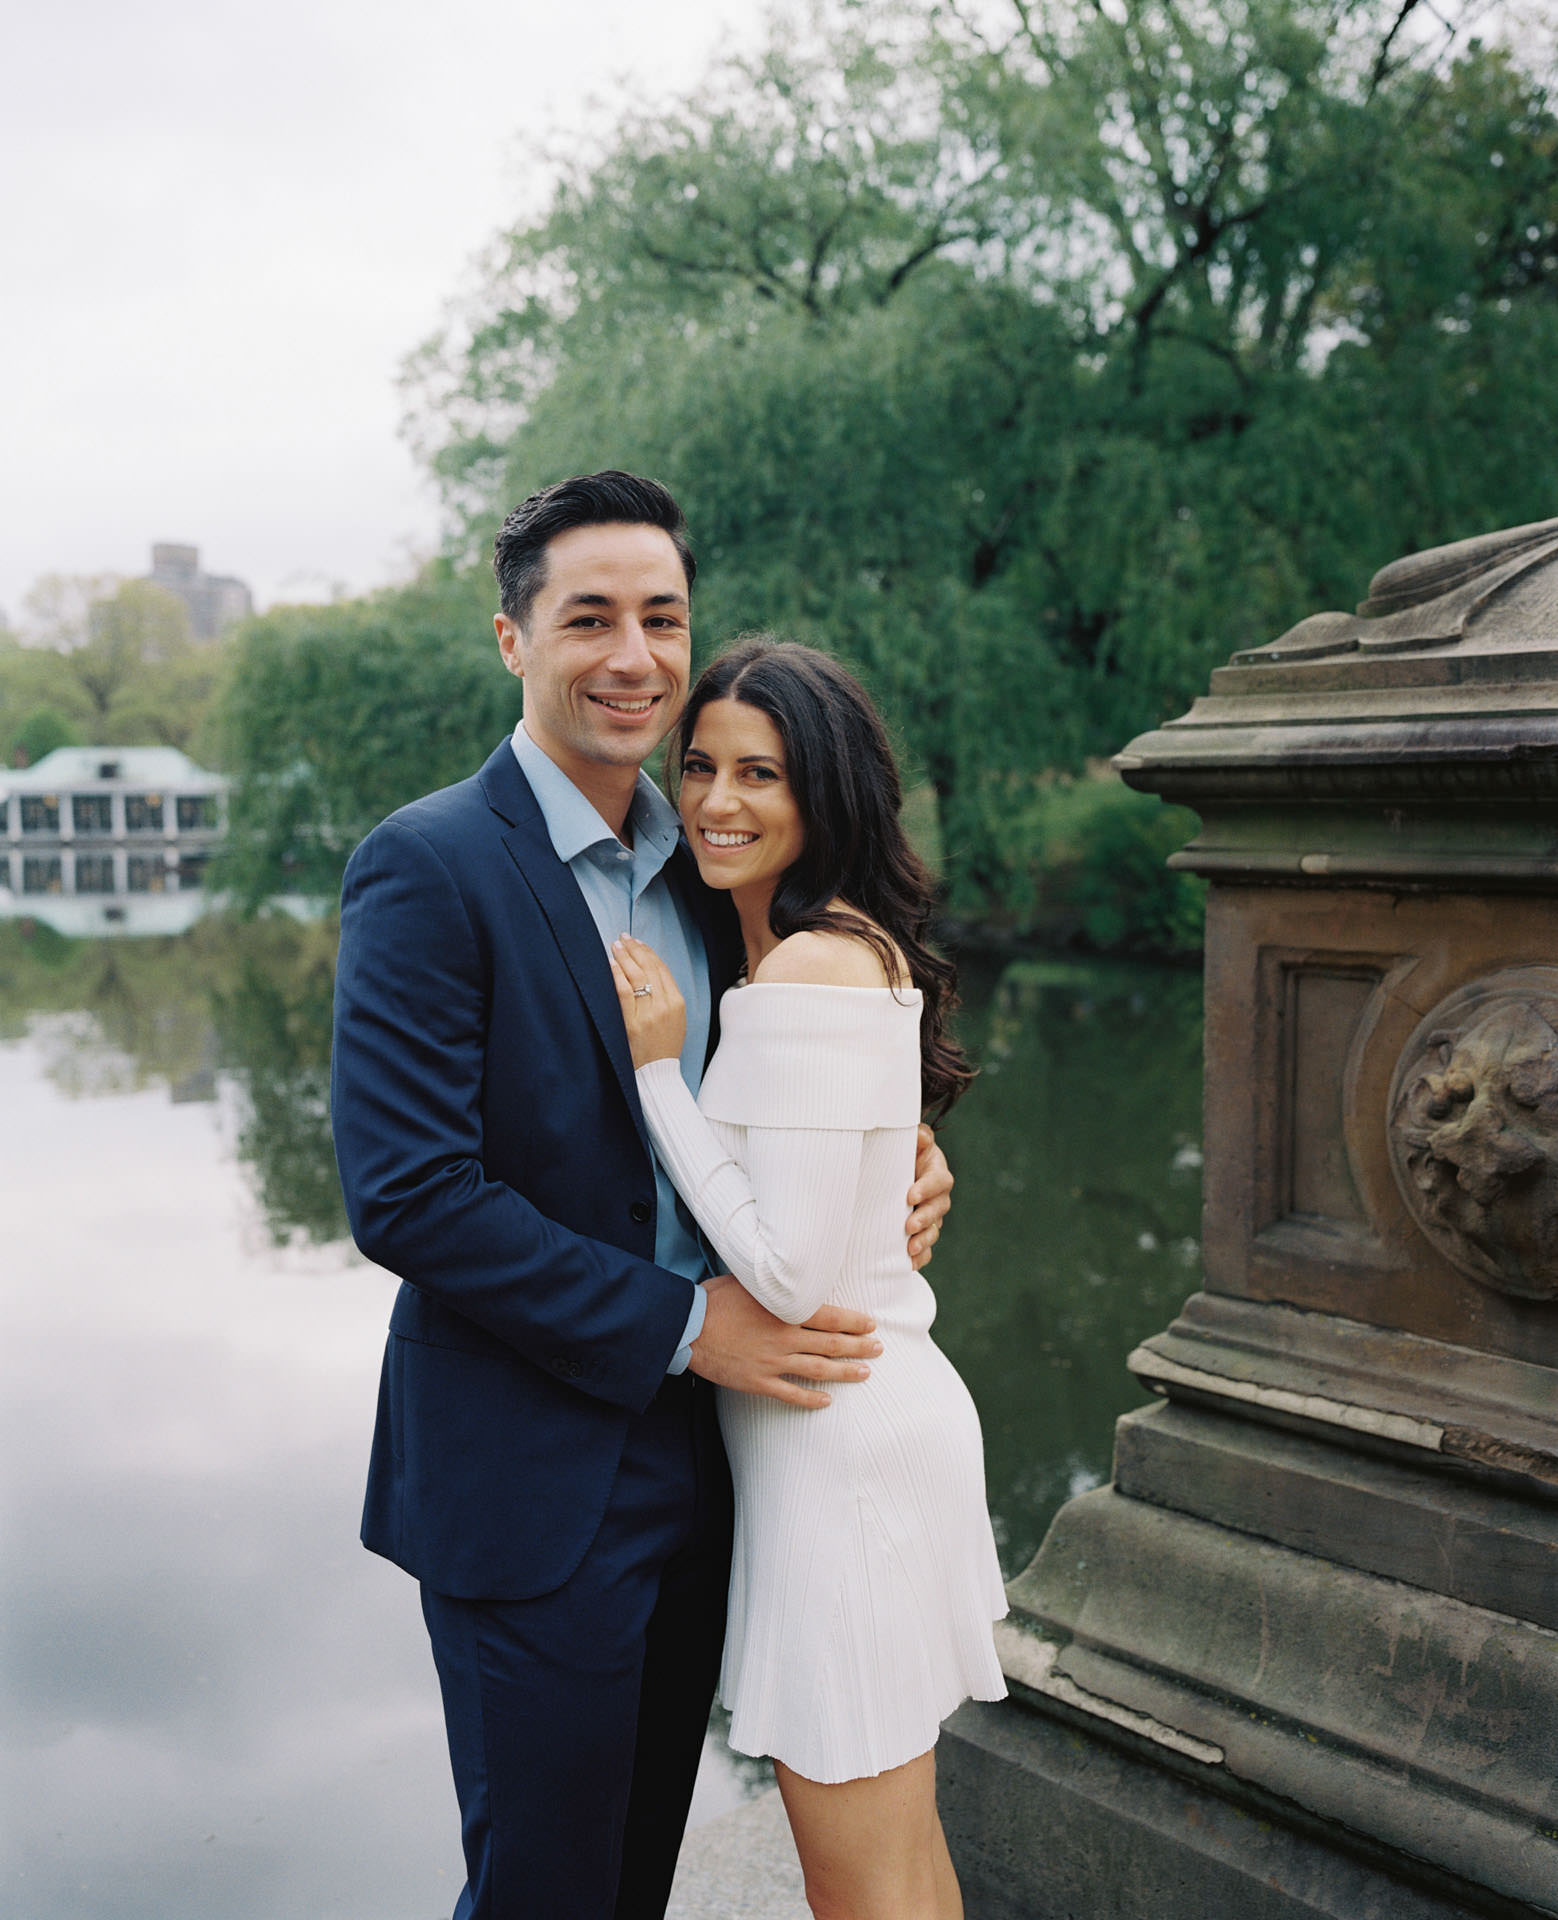 An engaged couple walking hand-in-hand along the water's edge near the Central Park Boathouse, with the charming boathouse in the background.